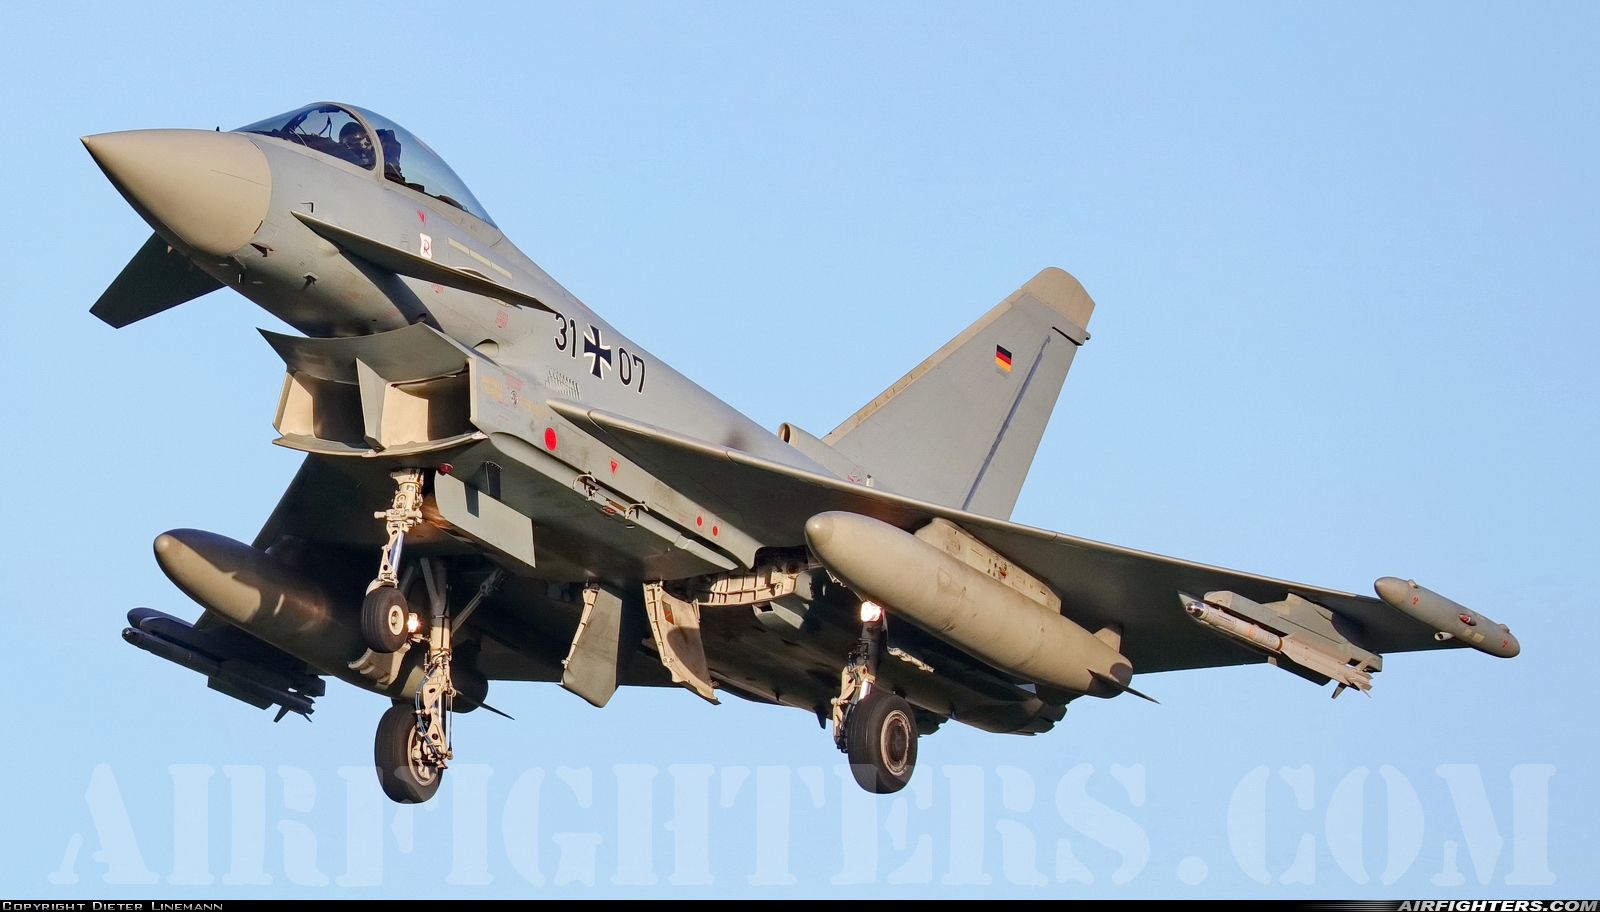 Germany - Air Force Eurofighter EF-2000 Typhoon S 31+07 at Wittmundhafen (Wittmund) (ETNT), Germany